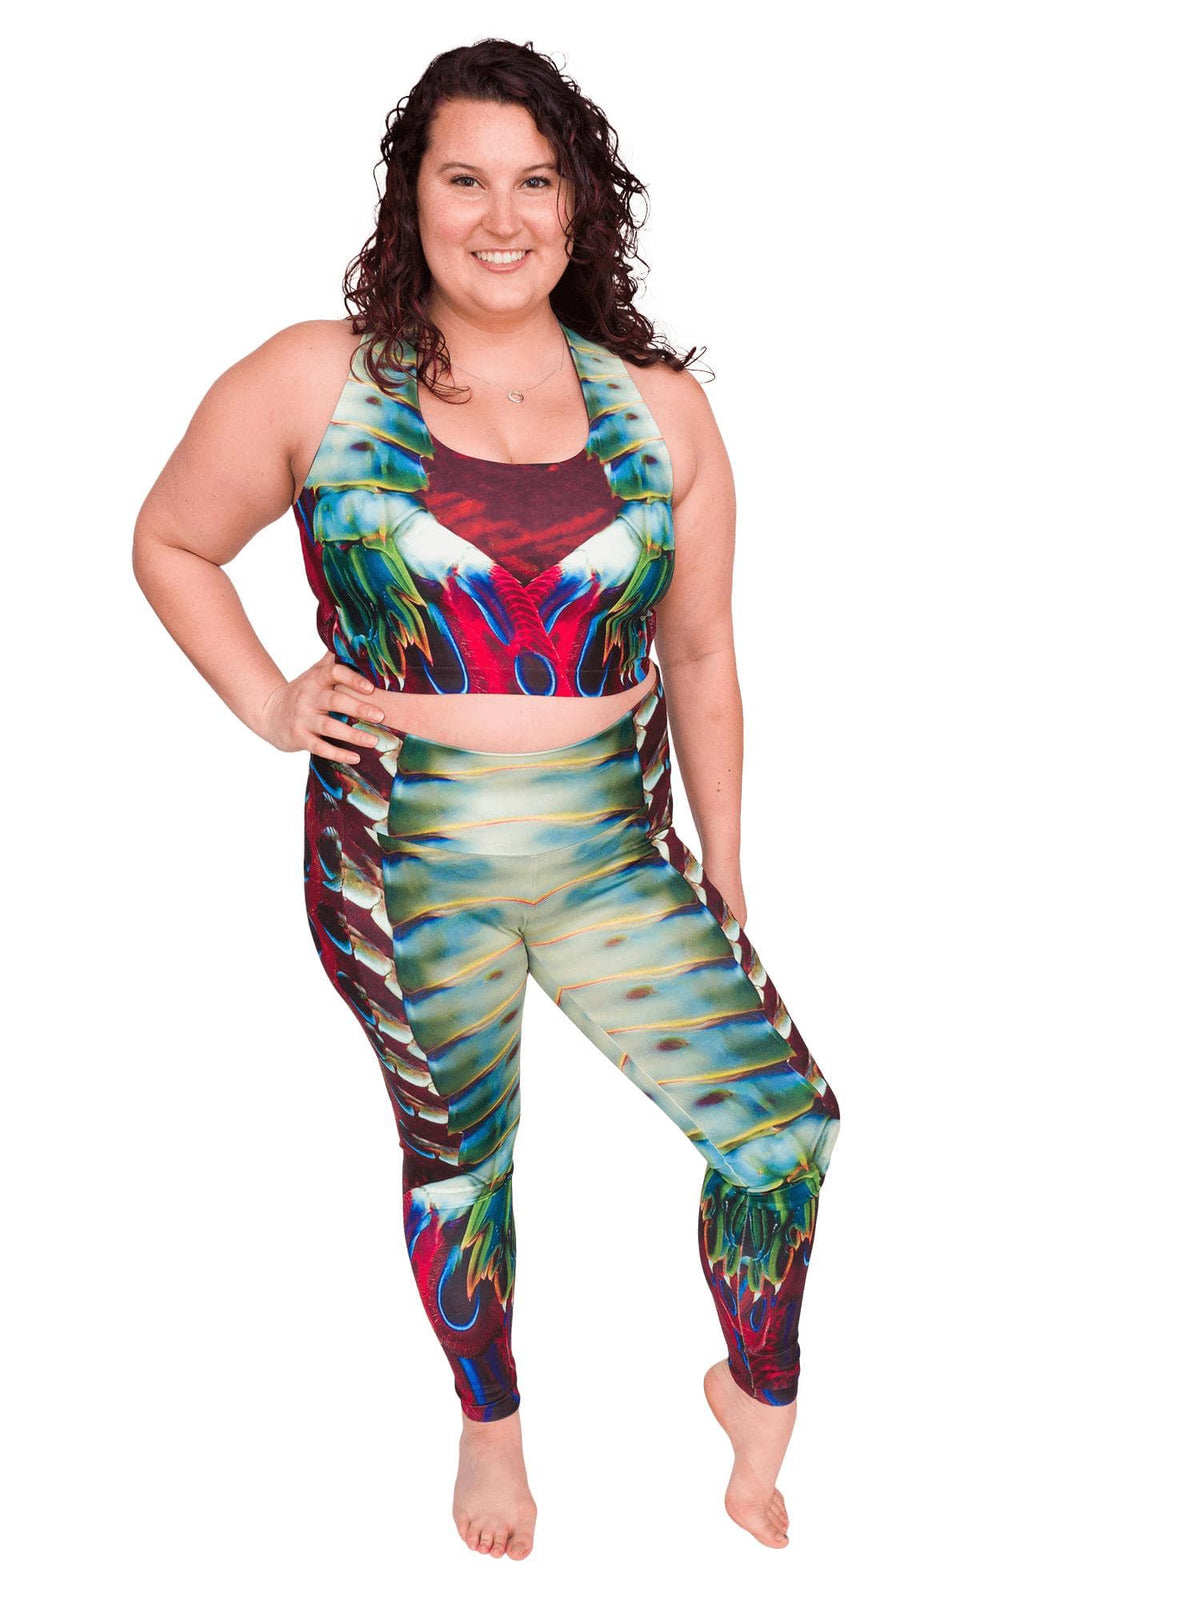 Model: Kela is a marine conservationist who strives to connect students with educational opportunities to help expand the reach of the marine science field. She is 5’5”, 185 lbs, 36F and is wearing a size XL top and legging.